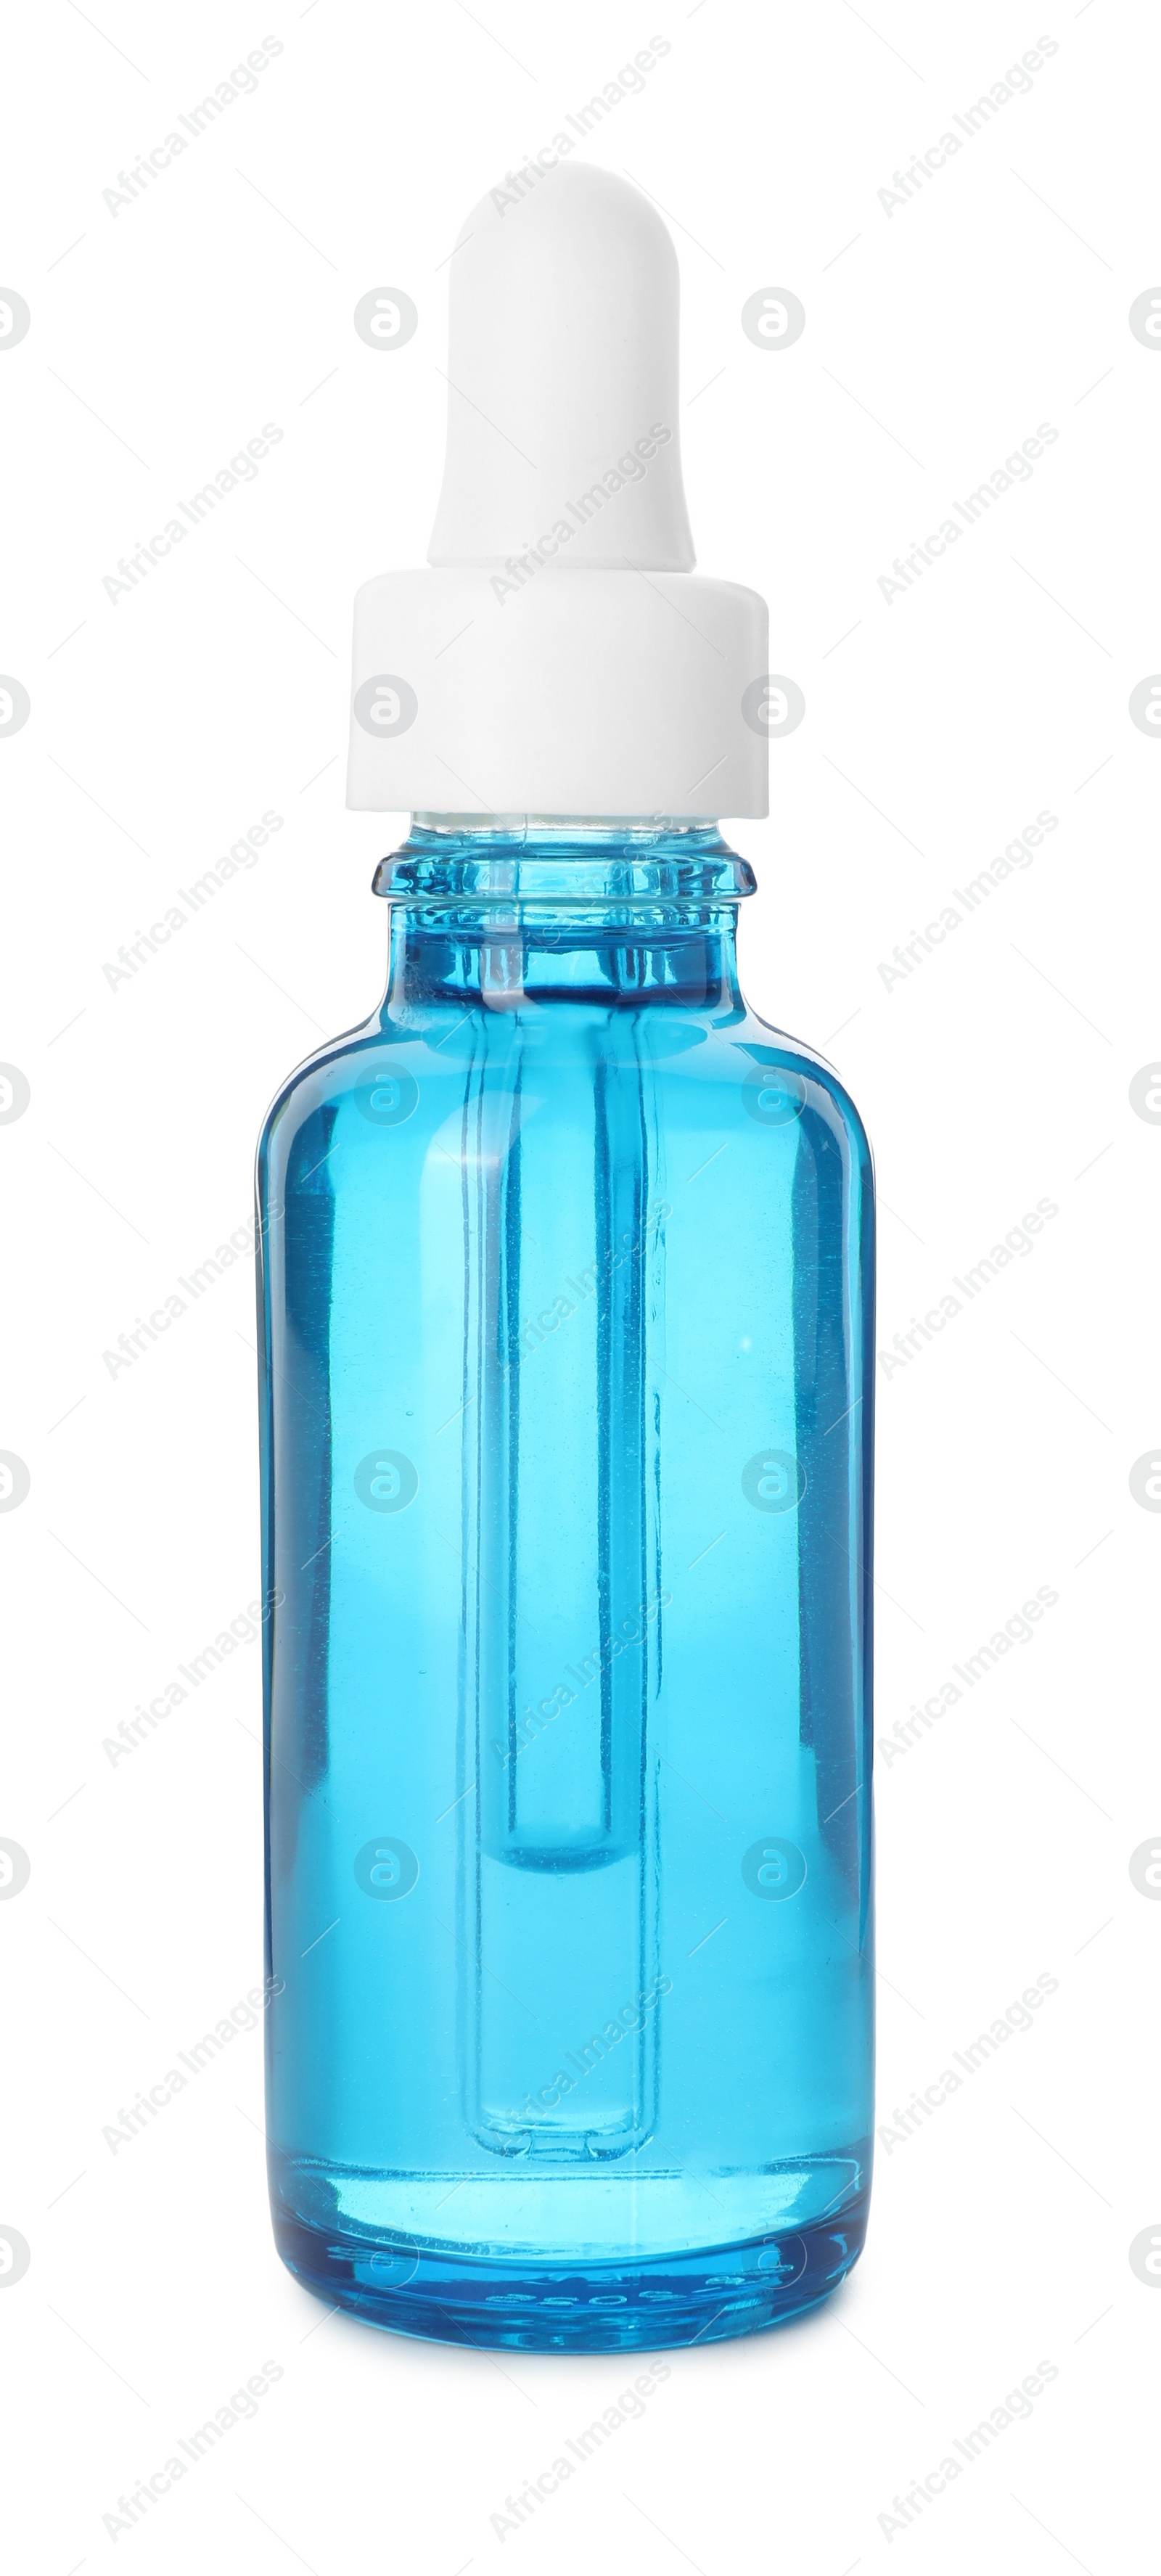 Photo of Bottle with cosmetic product isolated on white